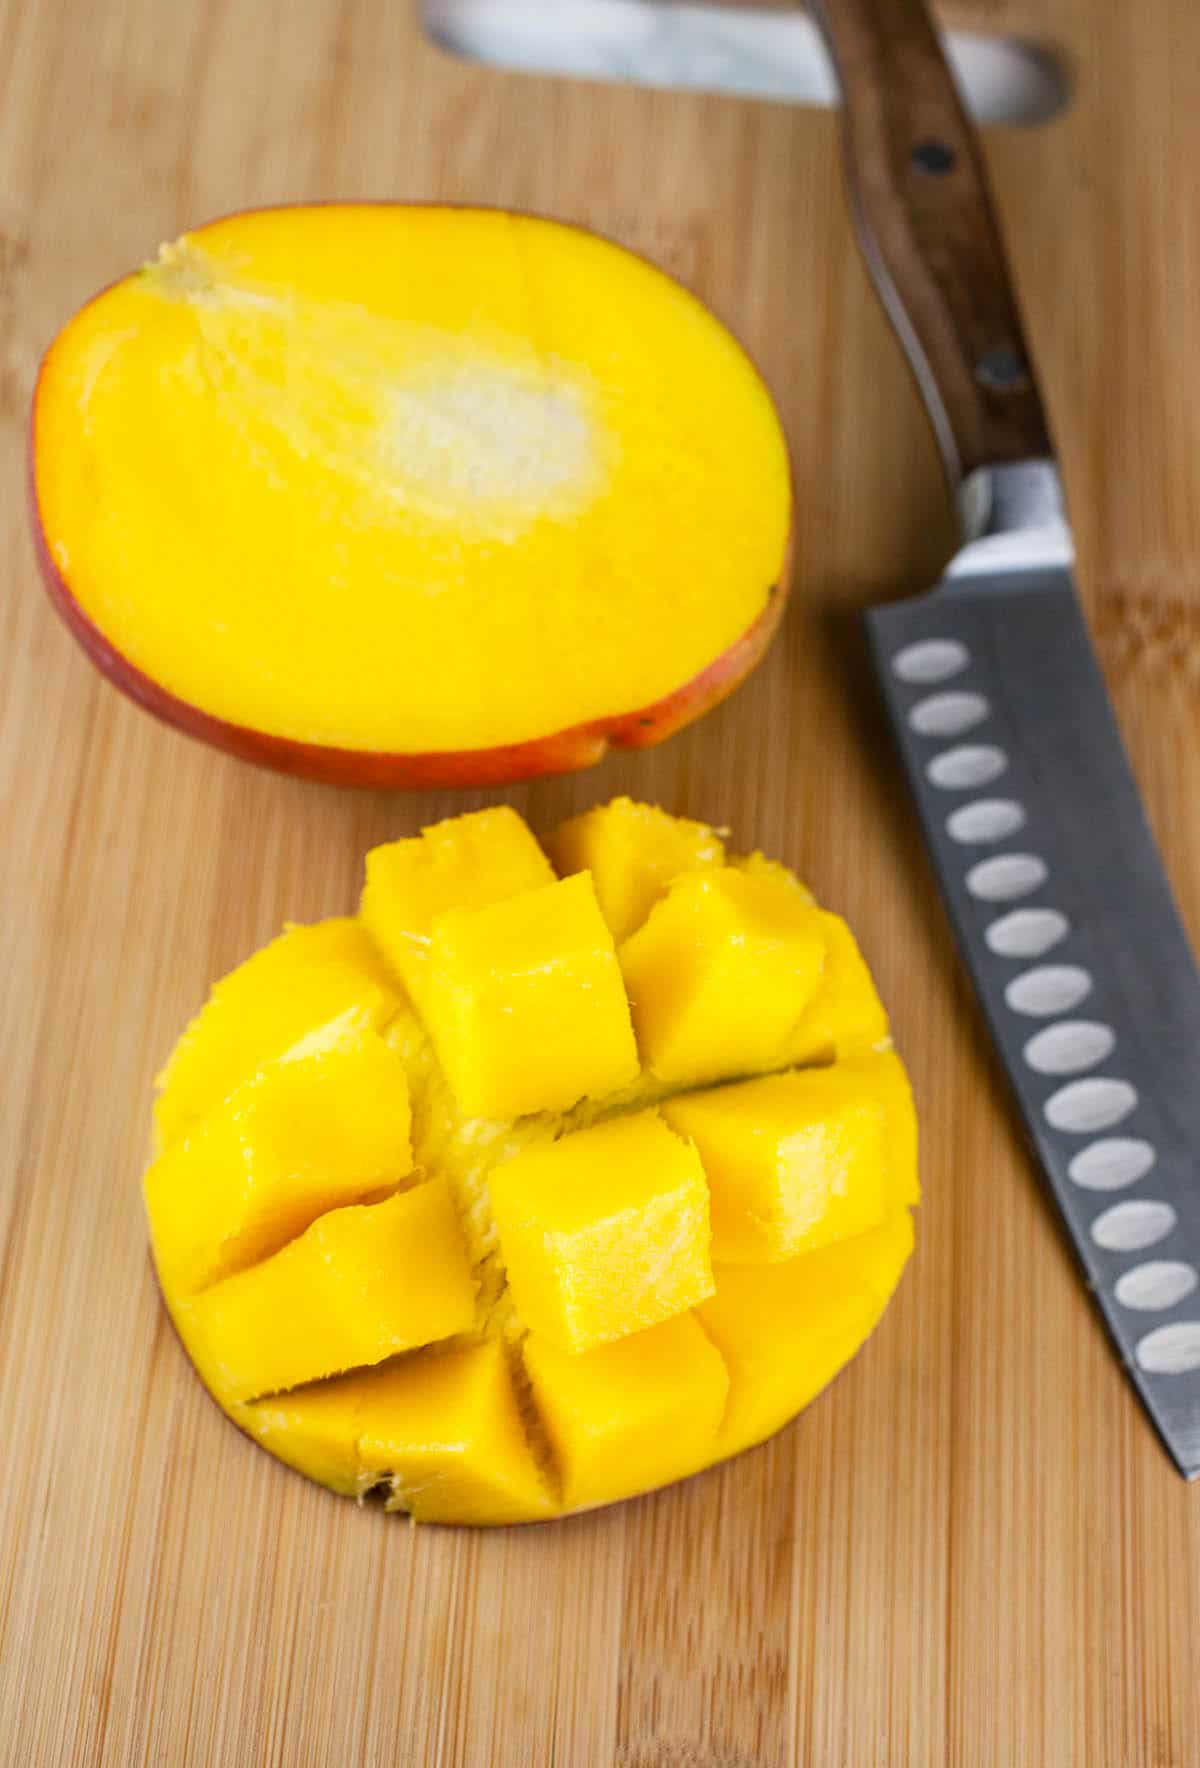 Mango cut in half and fanned out on wooden cutting board with knife.